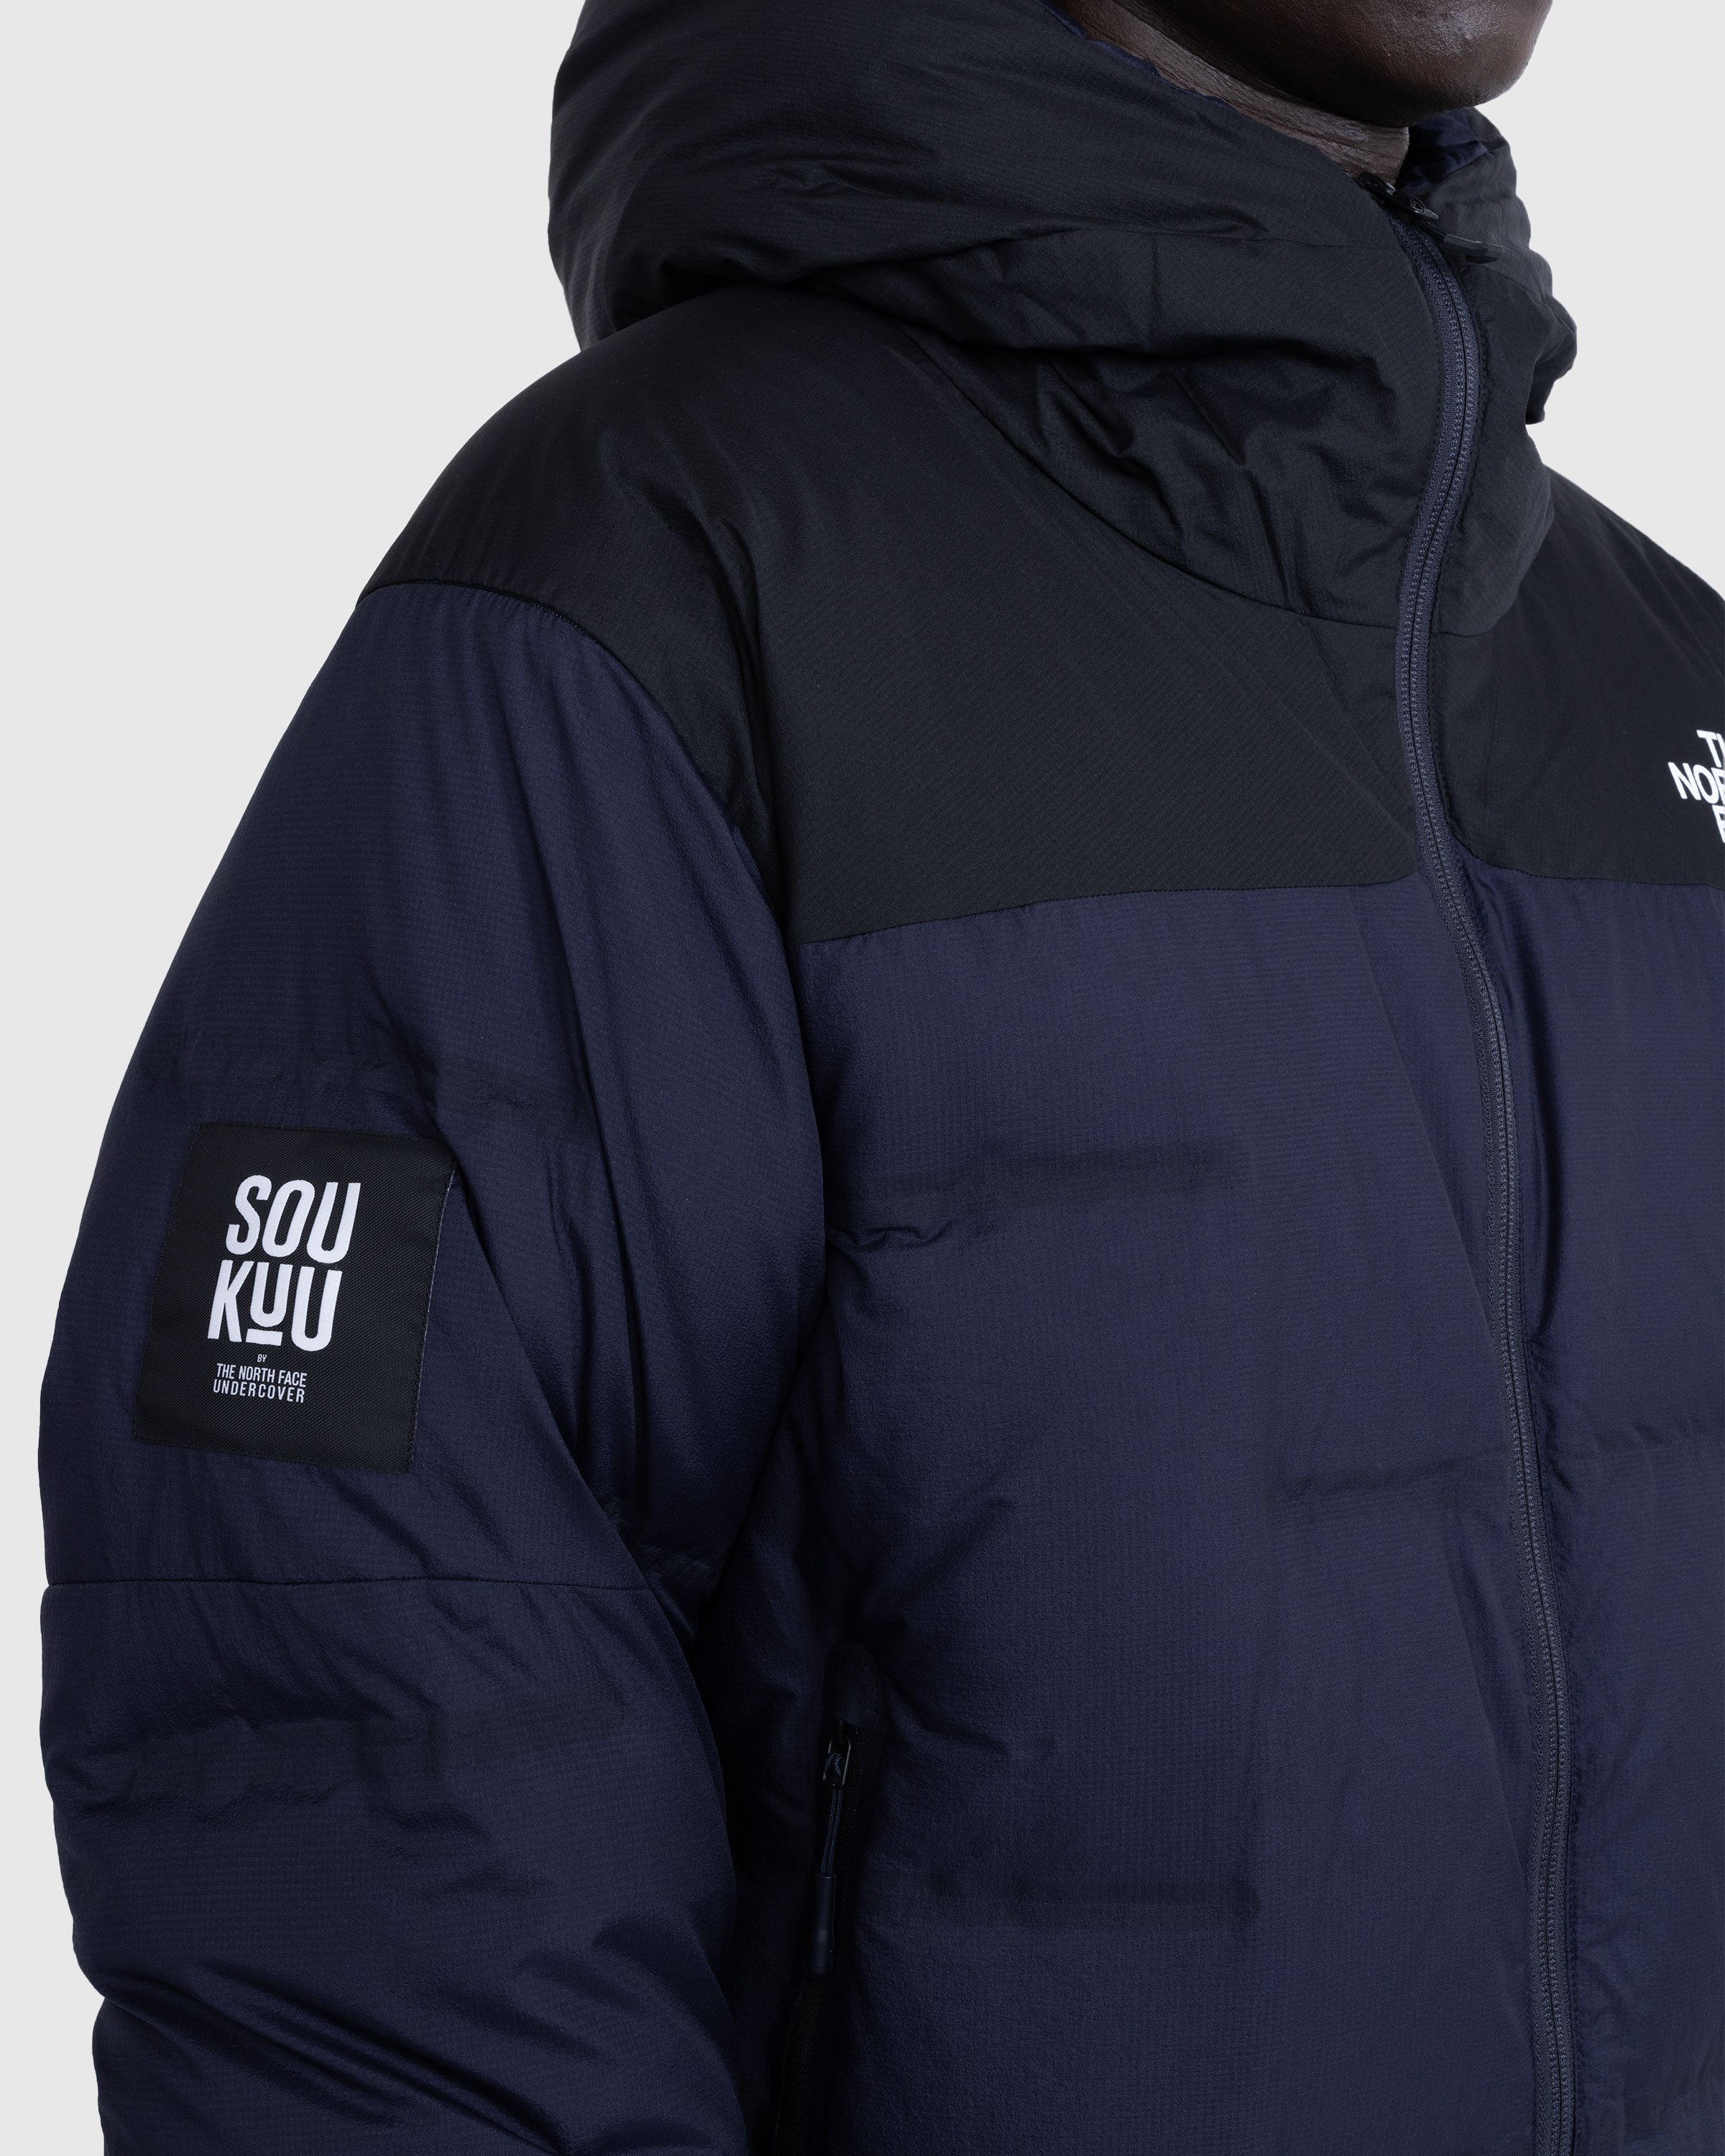 The North Face x UNDERCOVER - Soukuu Cloud Down Nupste Parka Black/Navy - Clothing - Multi - Image 6